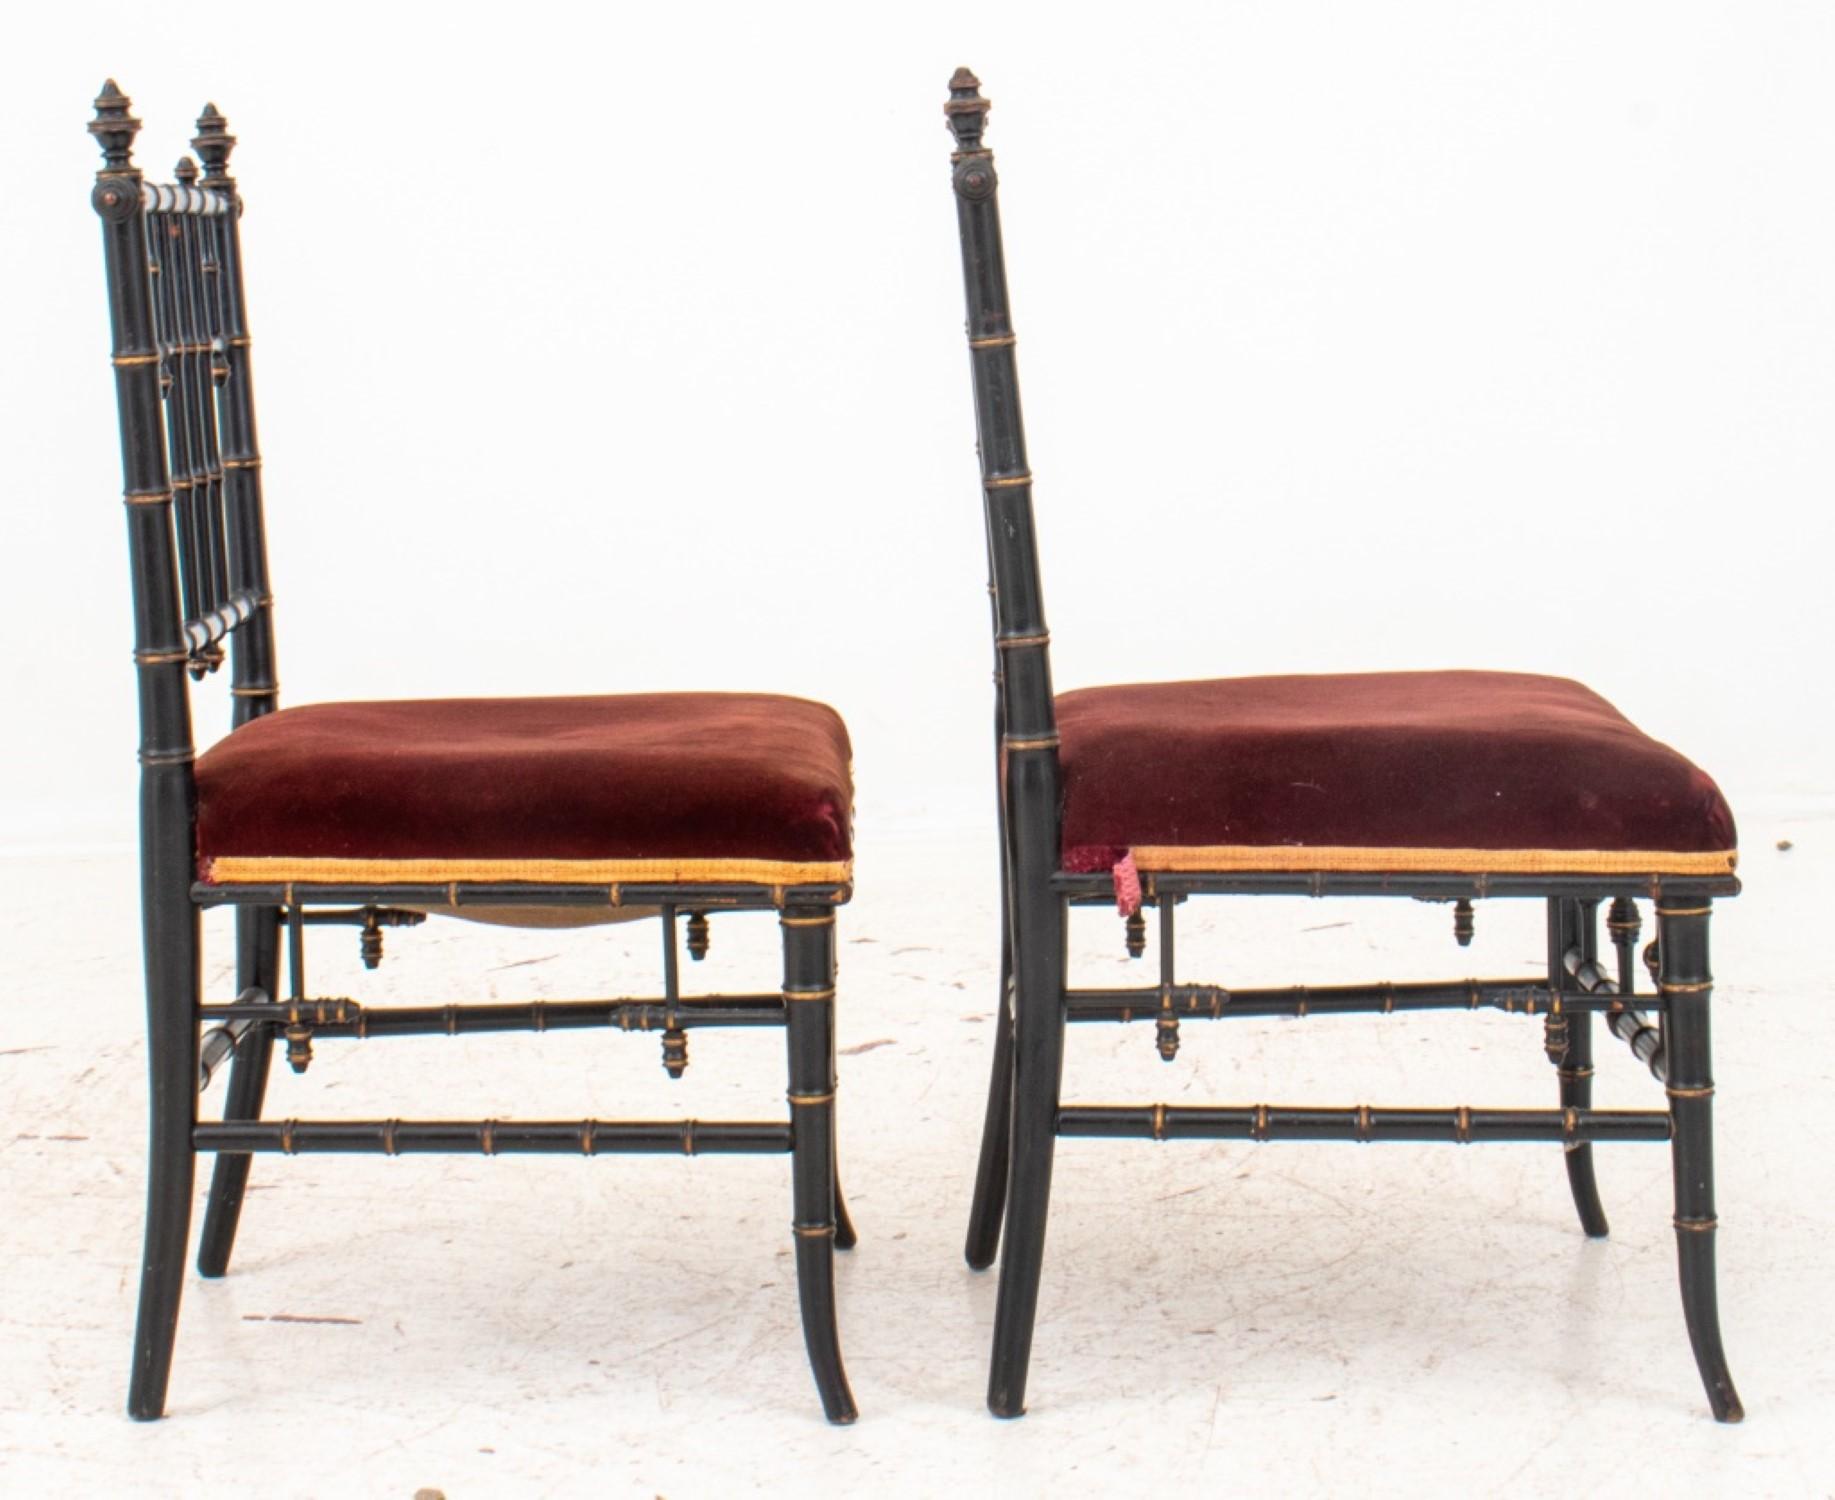 The American Aesthetic ebonized faux-bamboo side chairs are approximately 30.5 inches in height, 18 inches in width, and 15 inches in depth. The seat height is approximately 15 inches.




